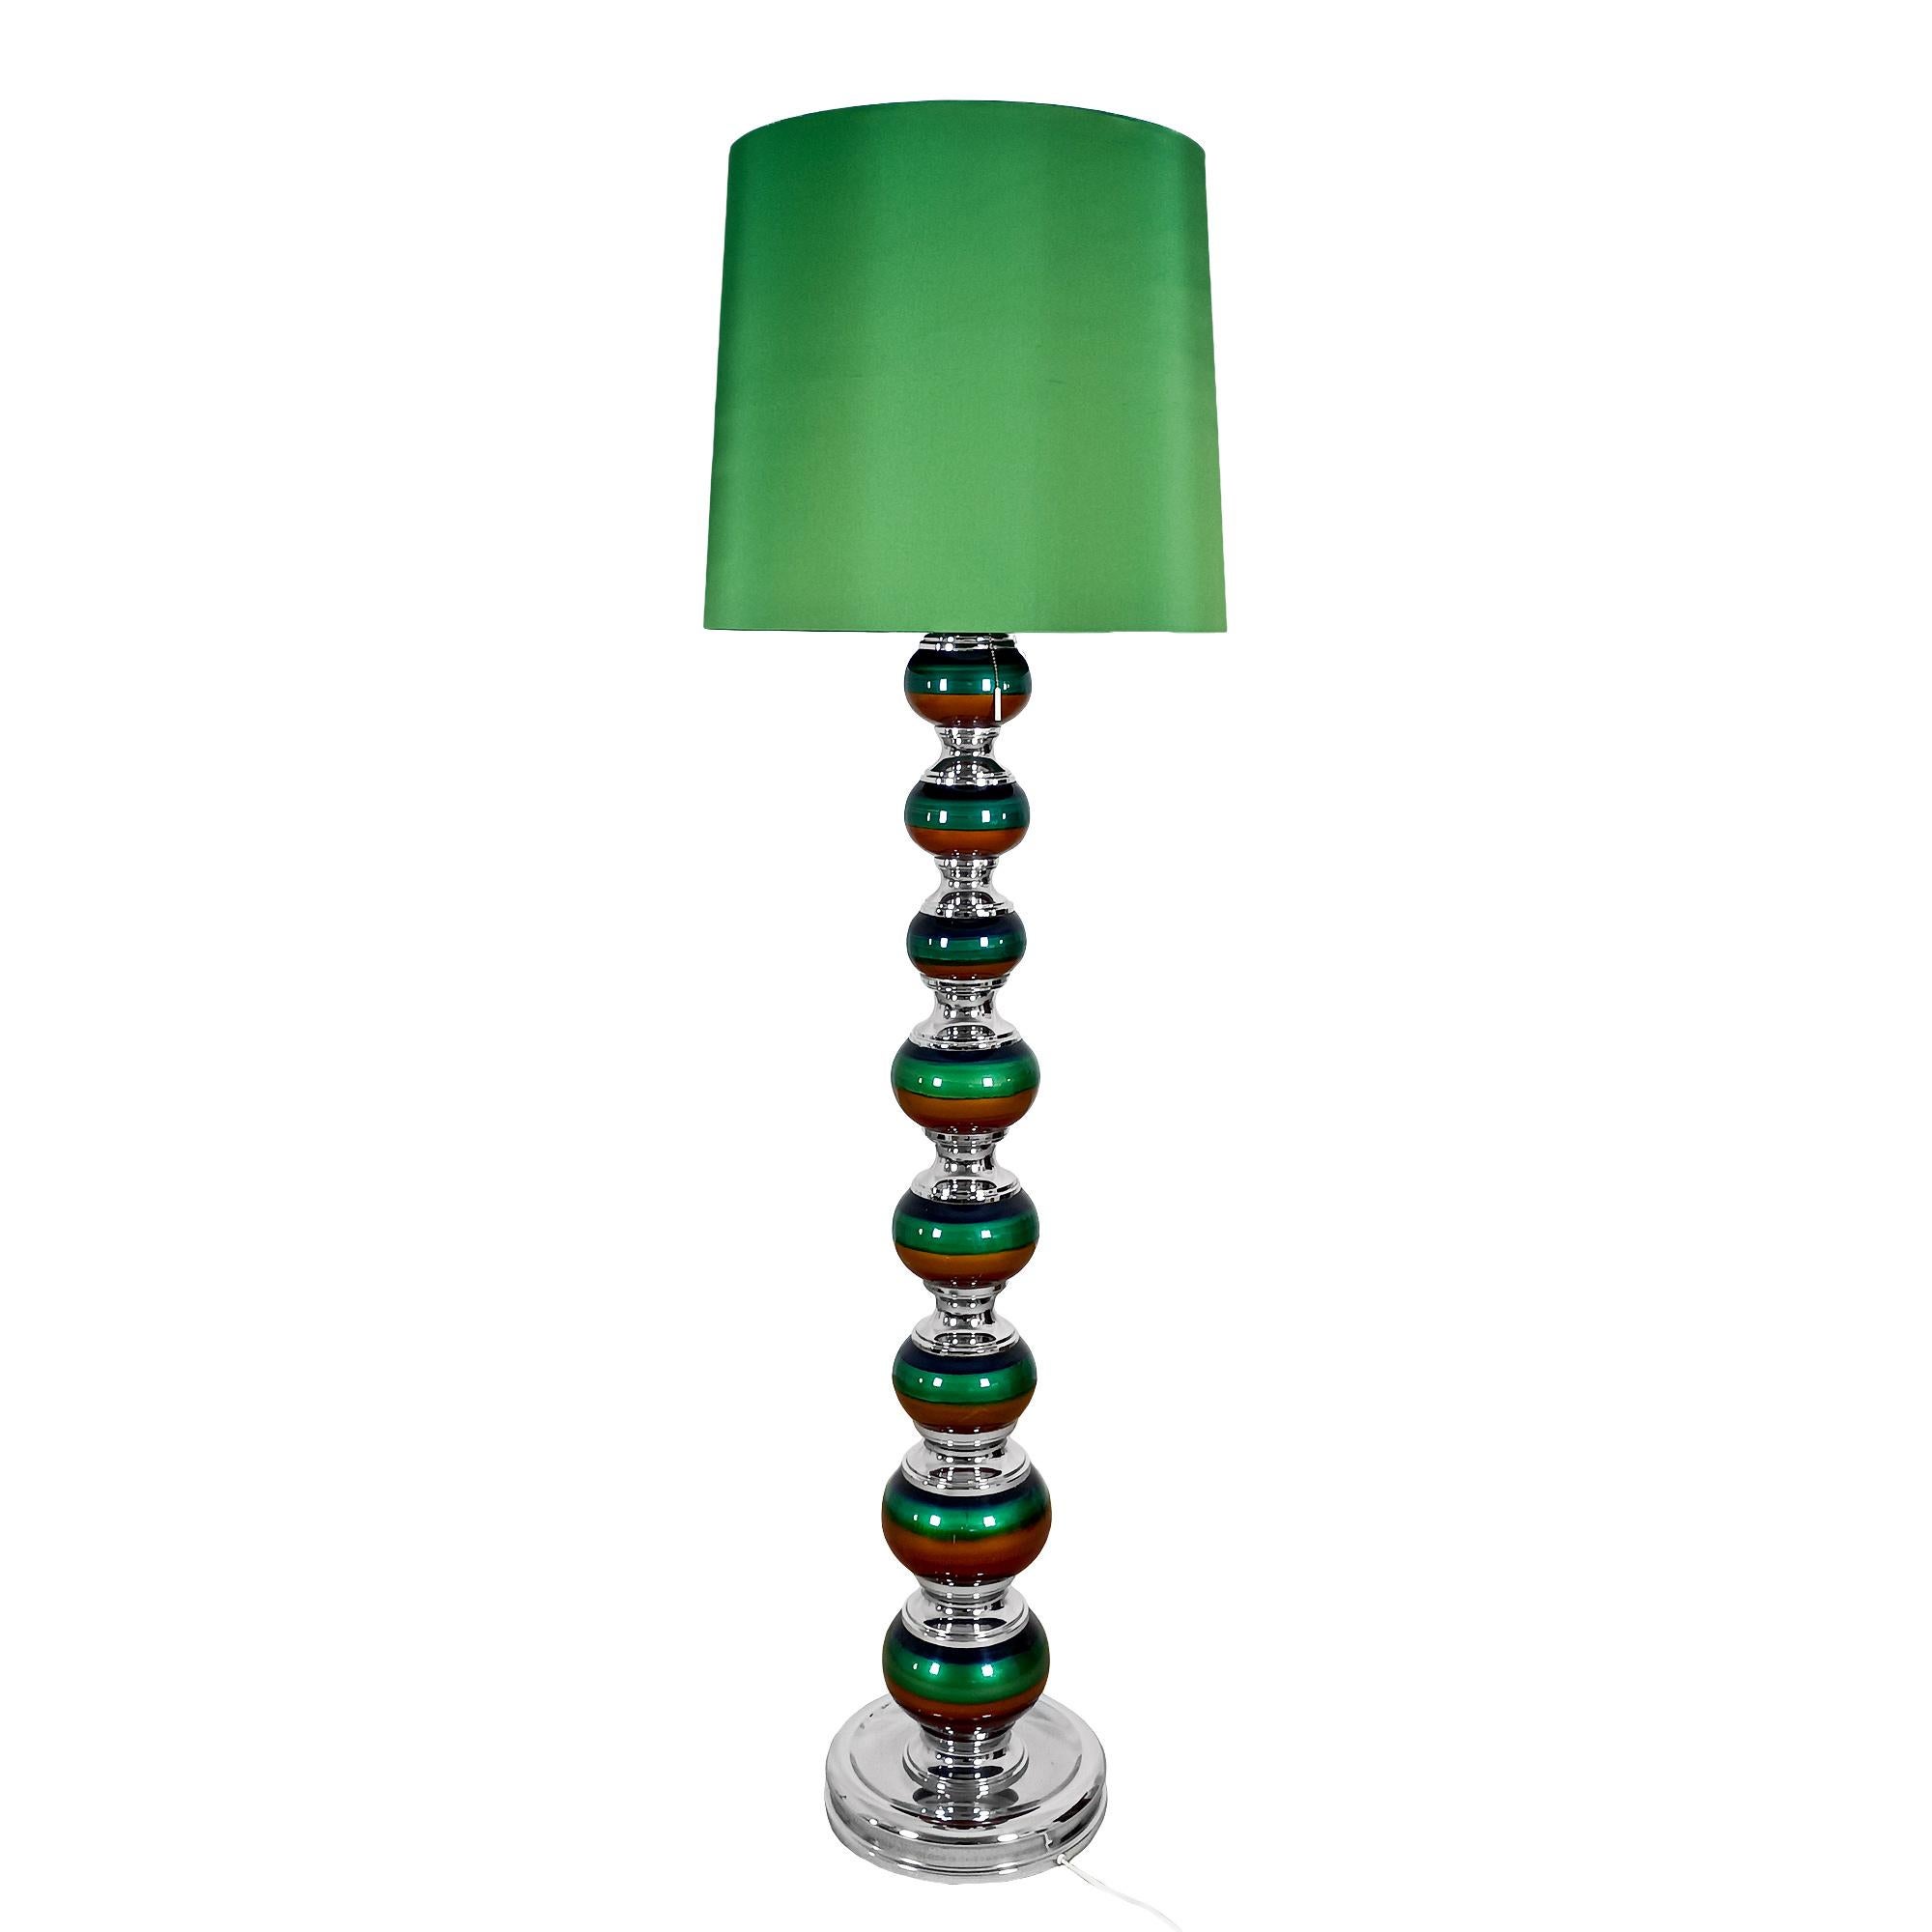 Standing lamp with body made of ceramic balls in shades of  blue-green and ochre, held in place by chrome-plated metal parts, such as the base. Renewed lampshade in green fabric.

Spain circa 1970